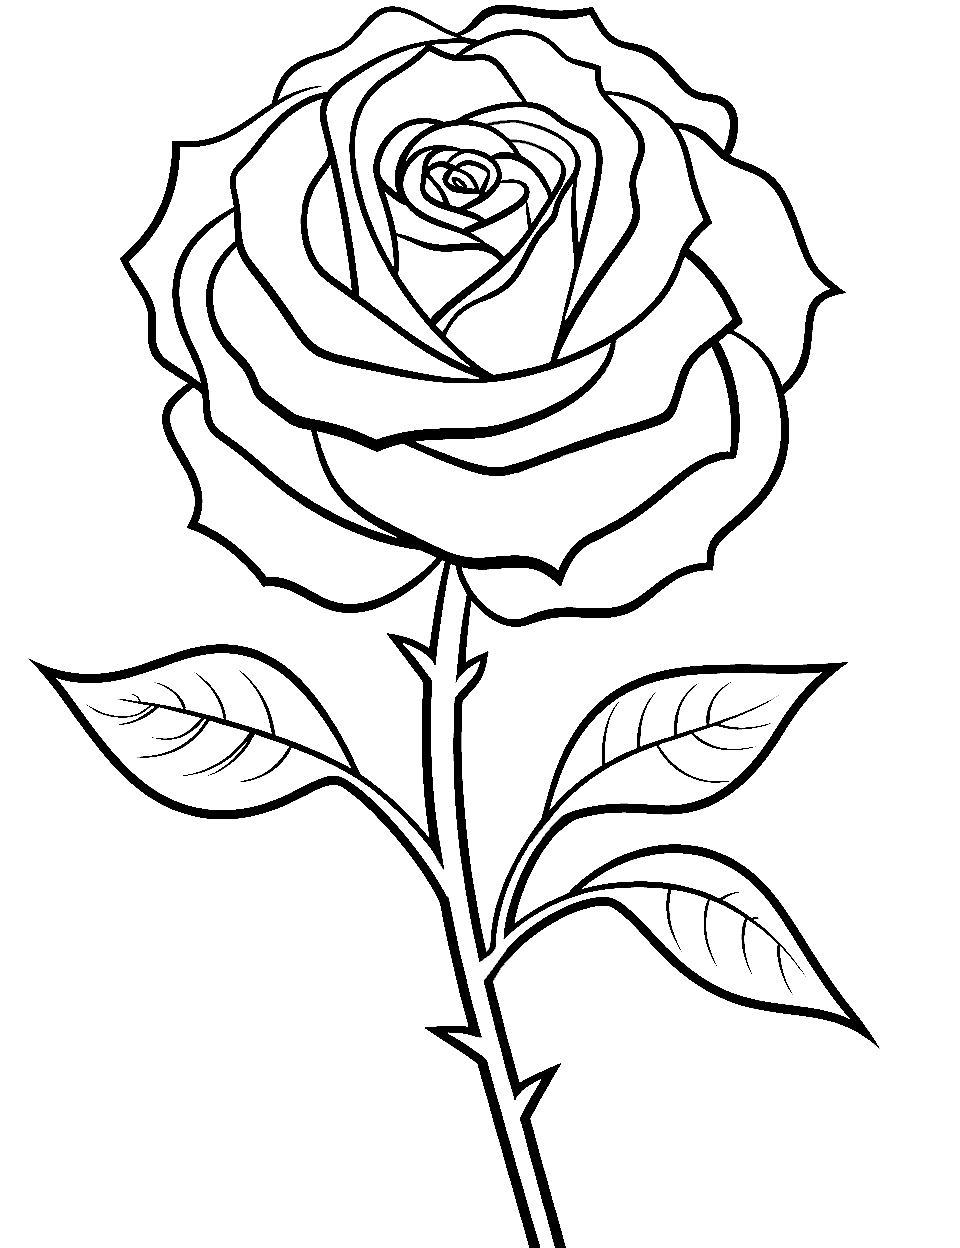 25 Rose Coloring Pages: Free Printable Sheets